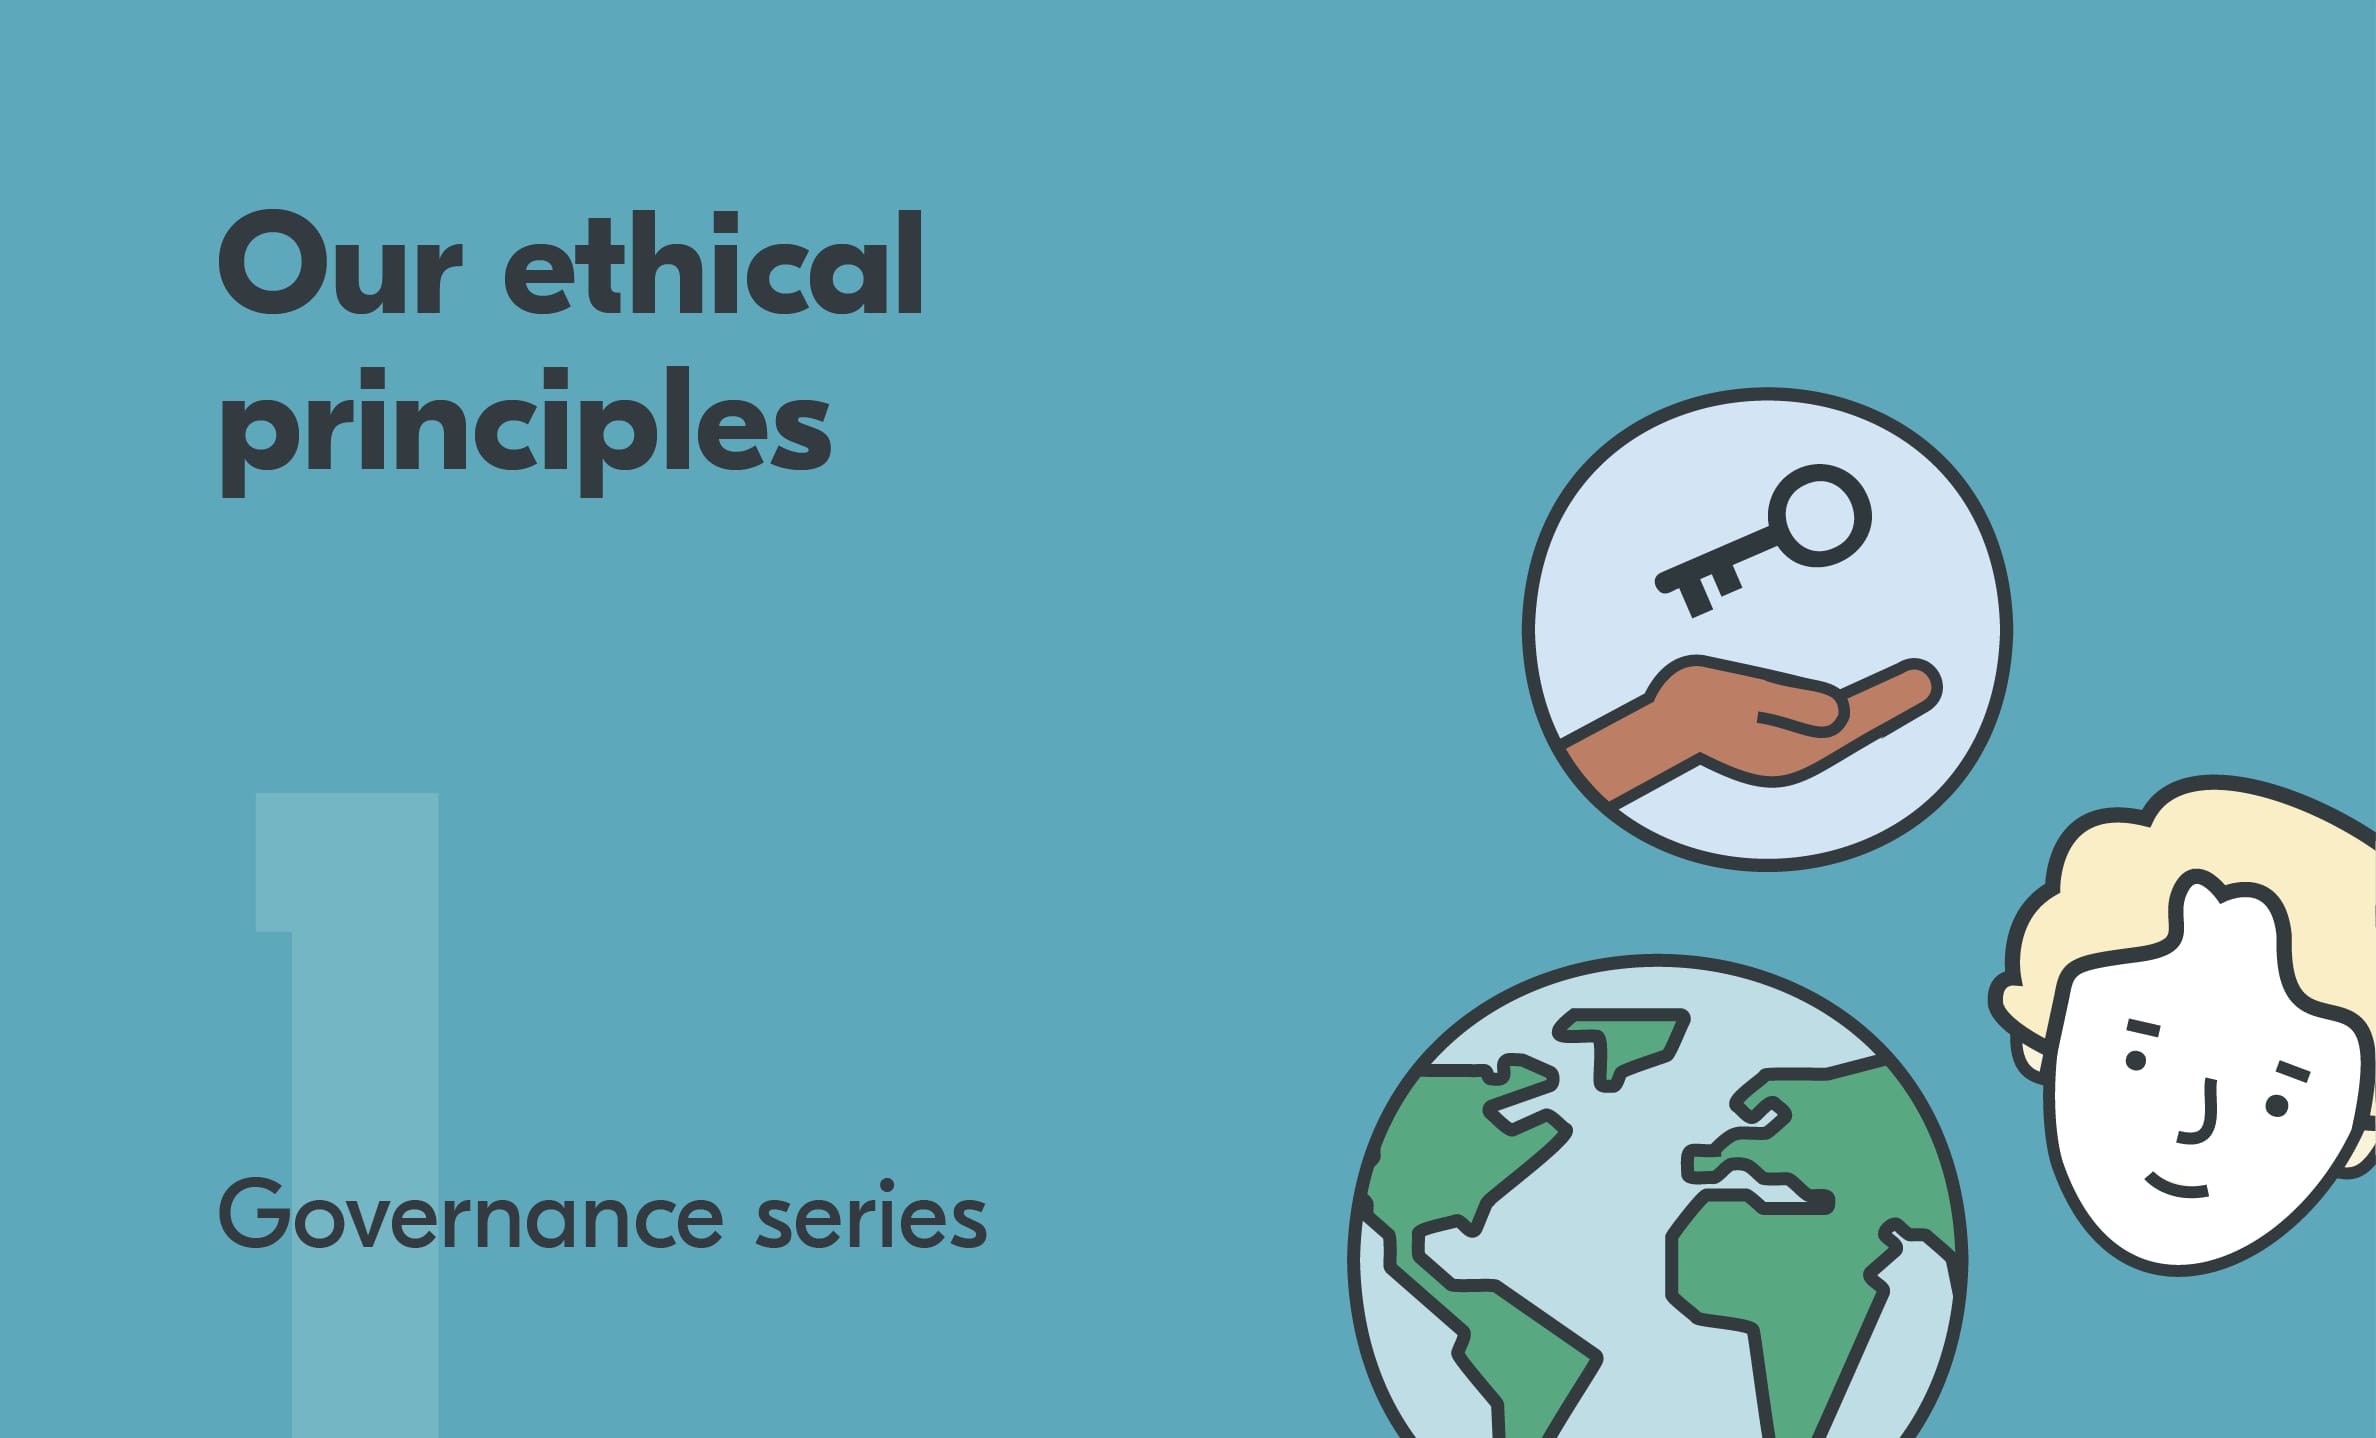 Graphics illustrating Yoti's ethical principles with the text: Governance series 1: Our ethical principles